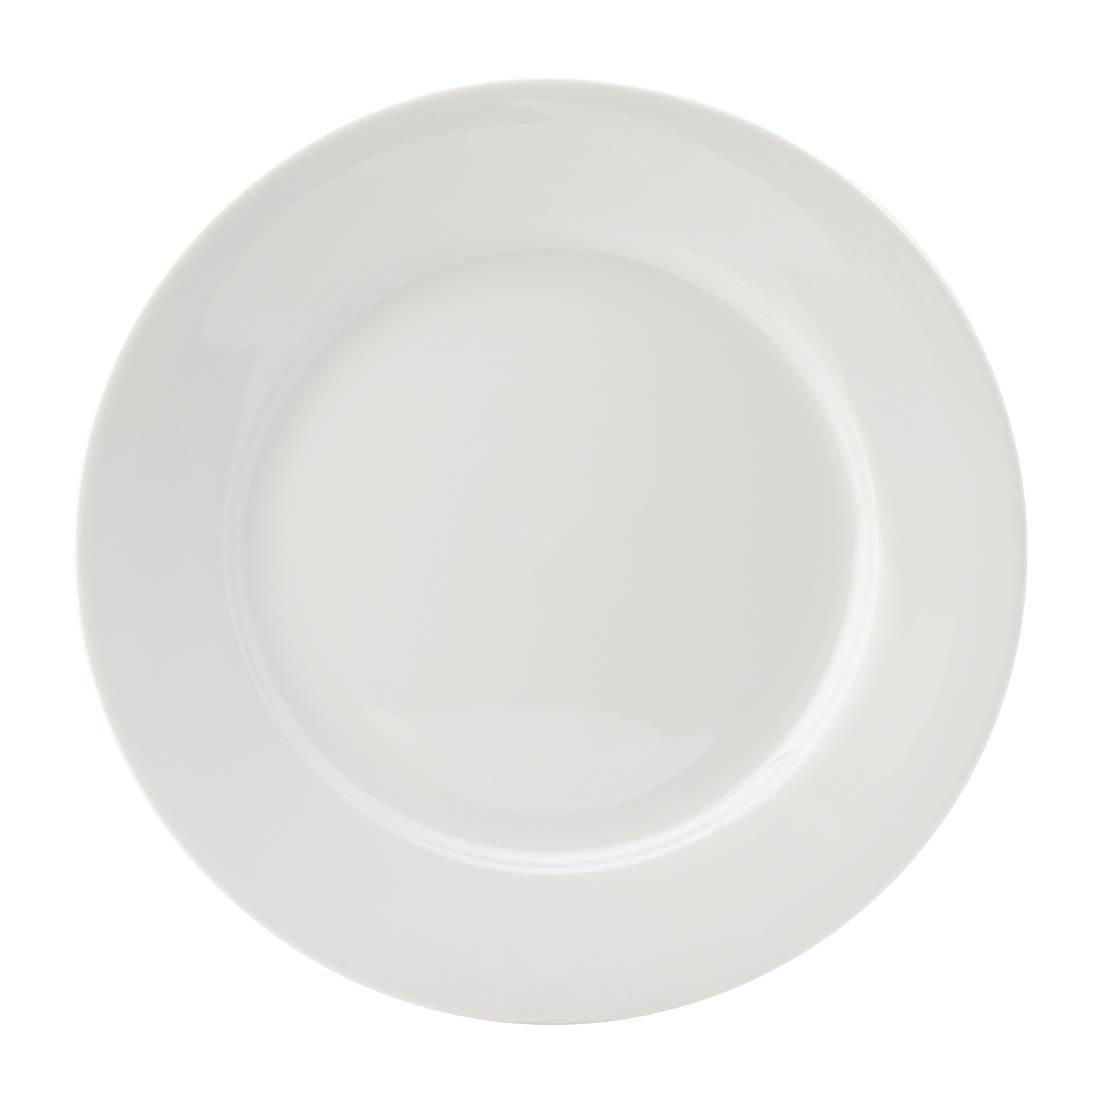 DY346 Utopia Titan Winged Plates White 310mm (Pack of 6)